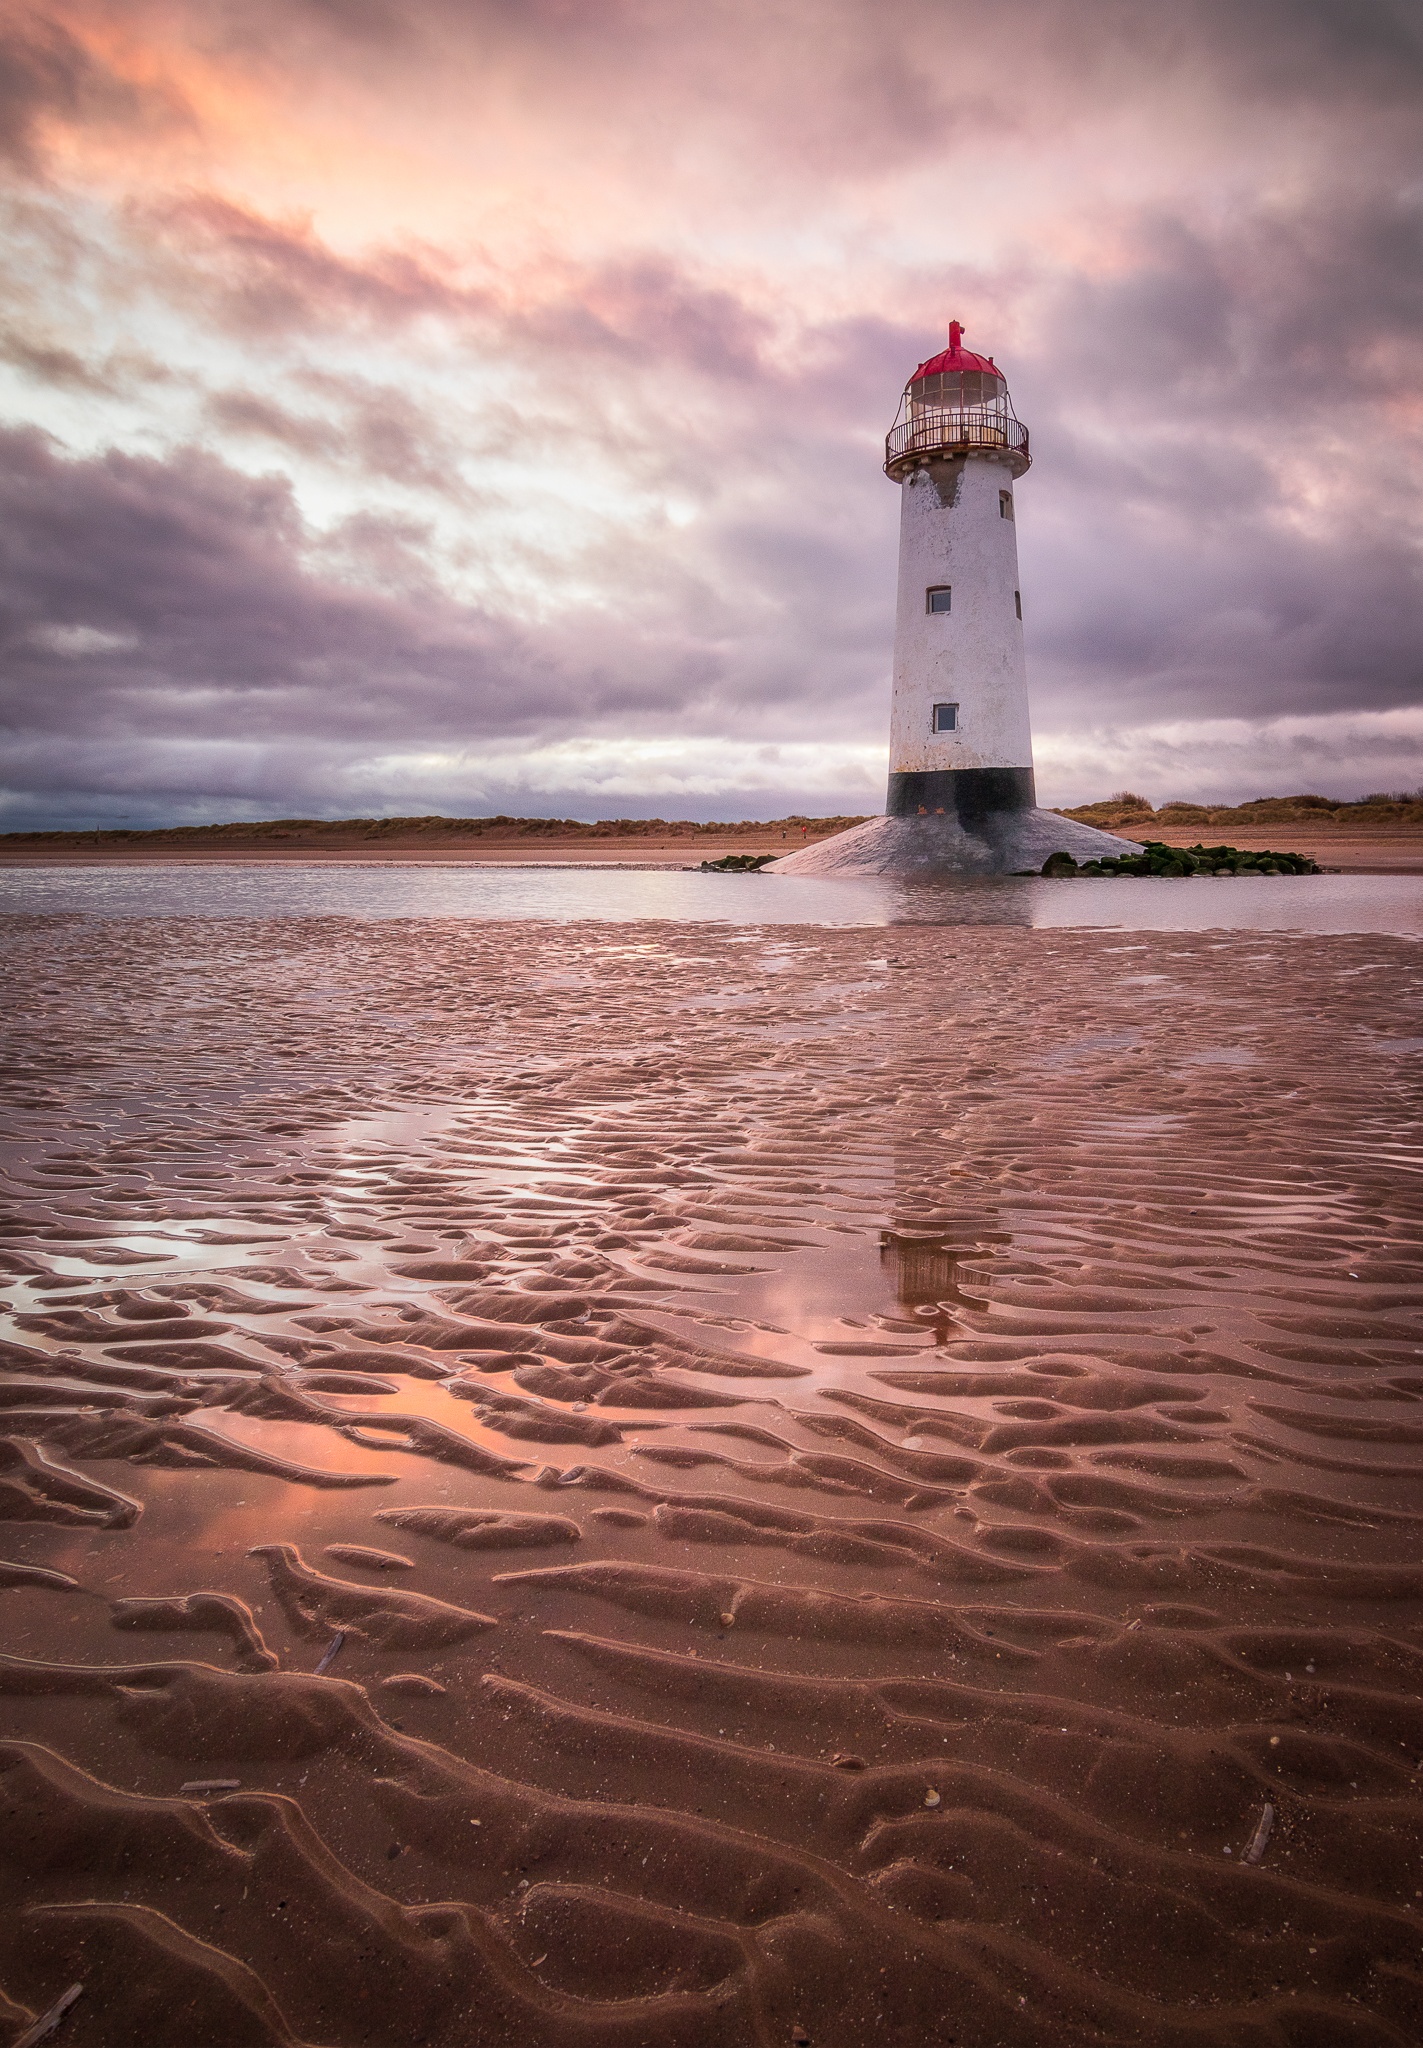 Talacre Lighthouse at dawn under a glowing cloudy sky and reflected in pools at low tide. Prints available for purchase.